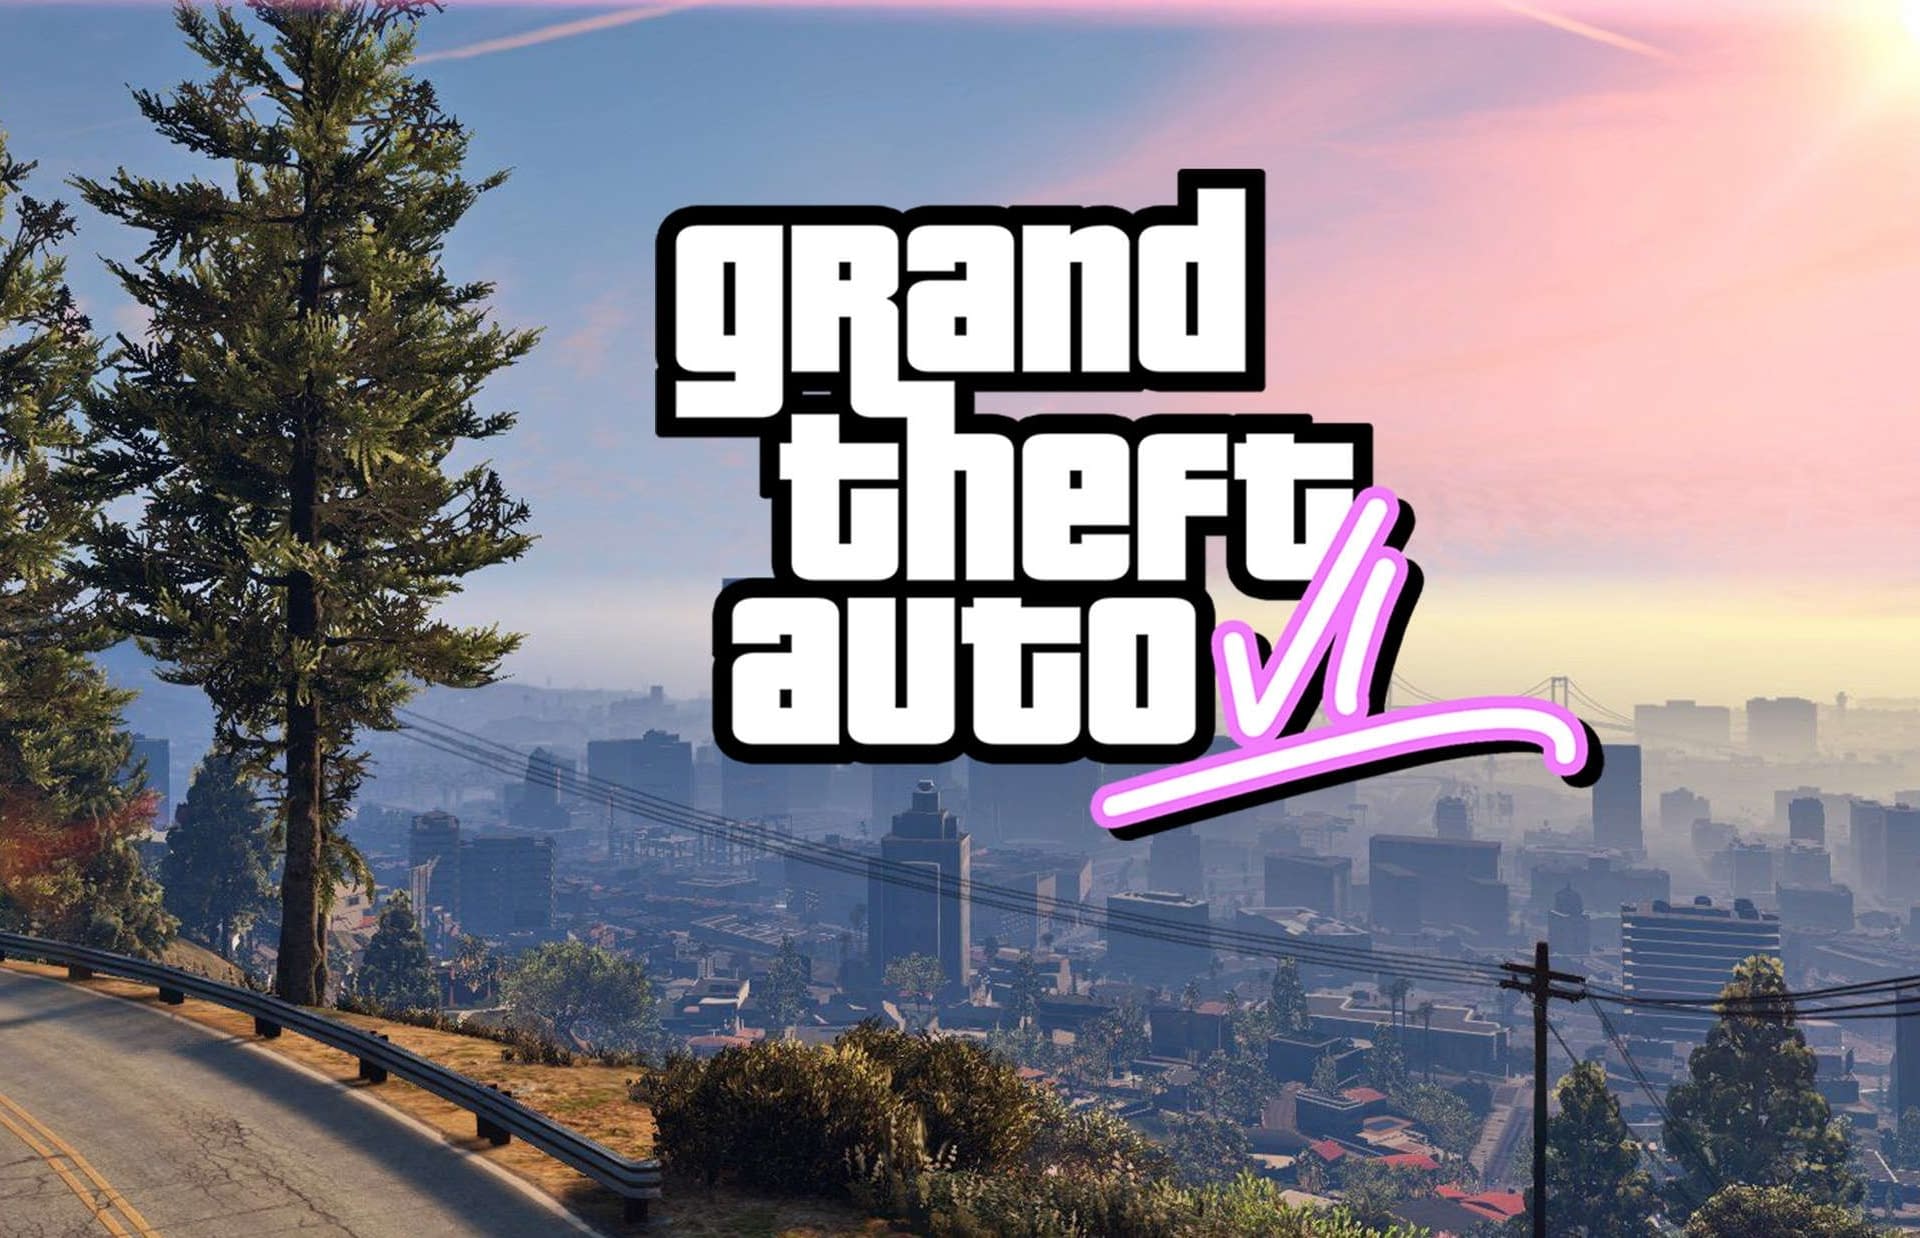 GTA 6 will not be Judged for the Hacker “Do Not Displace Able Balance”